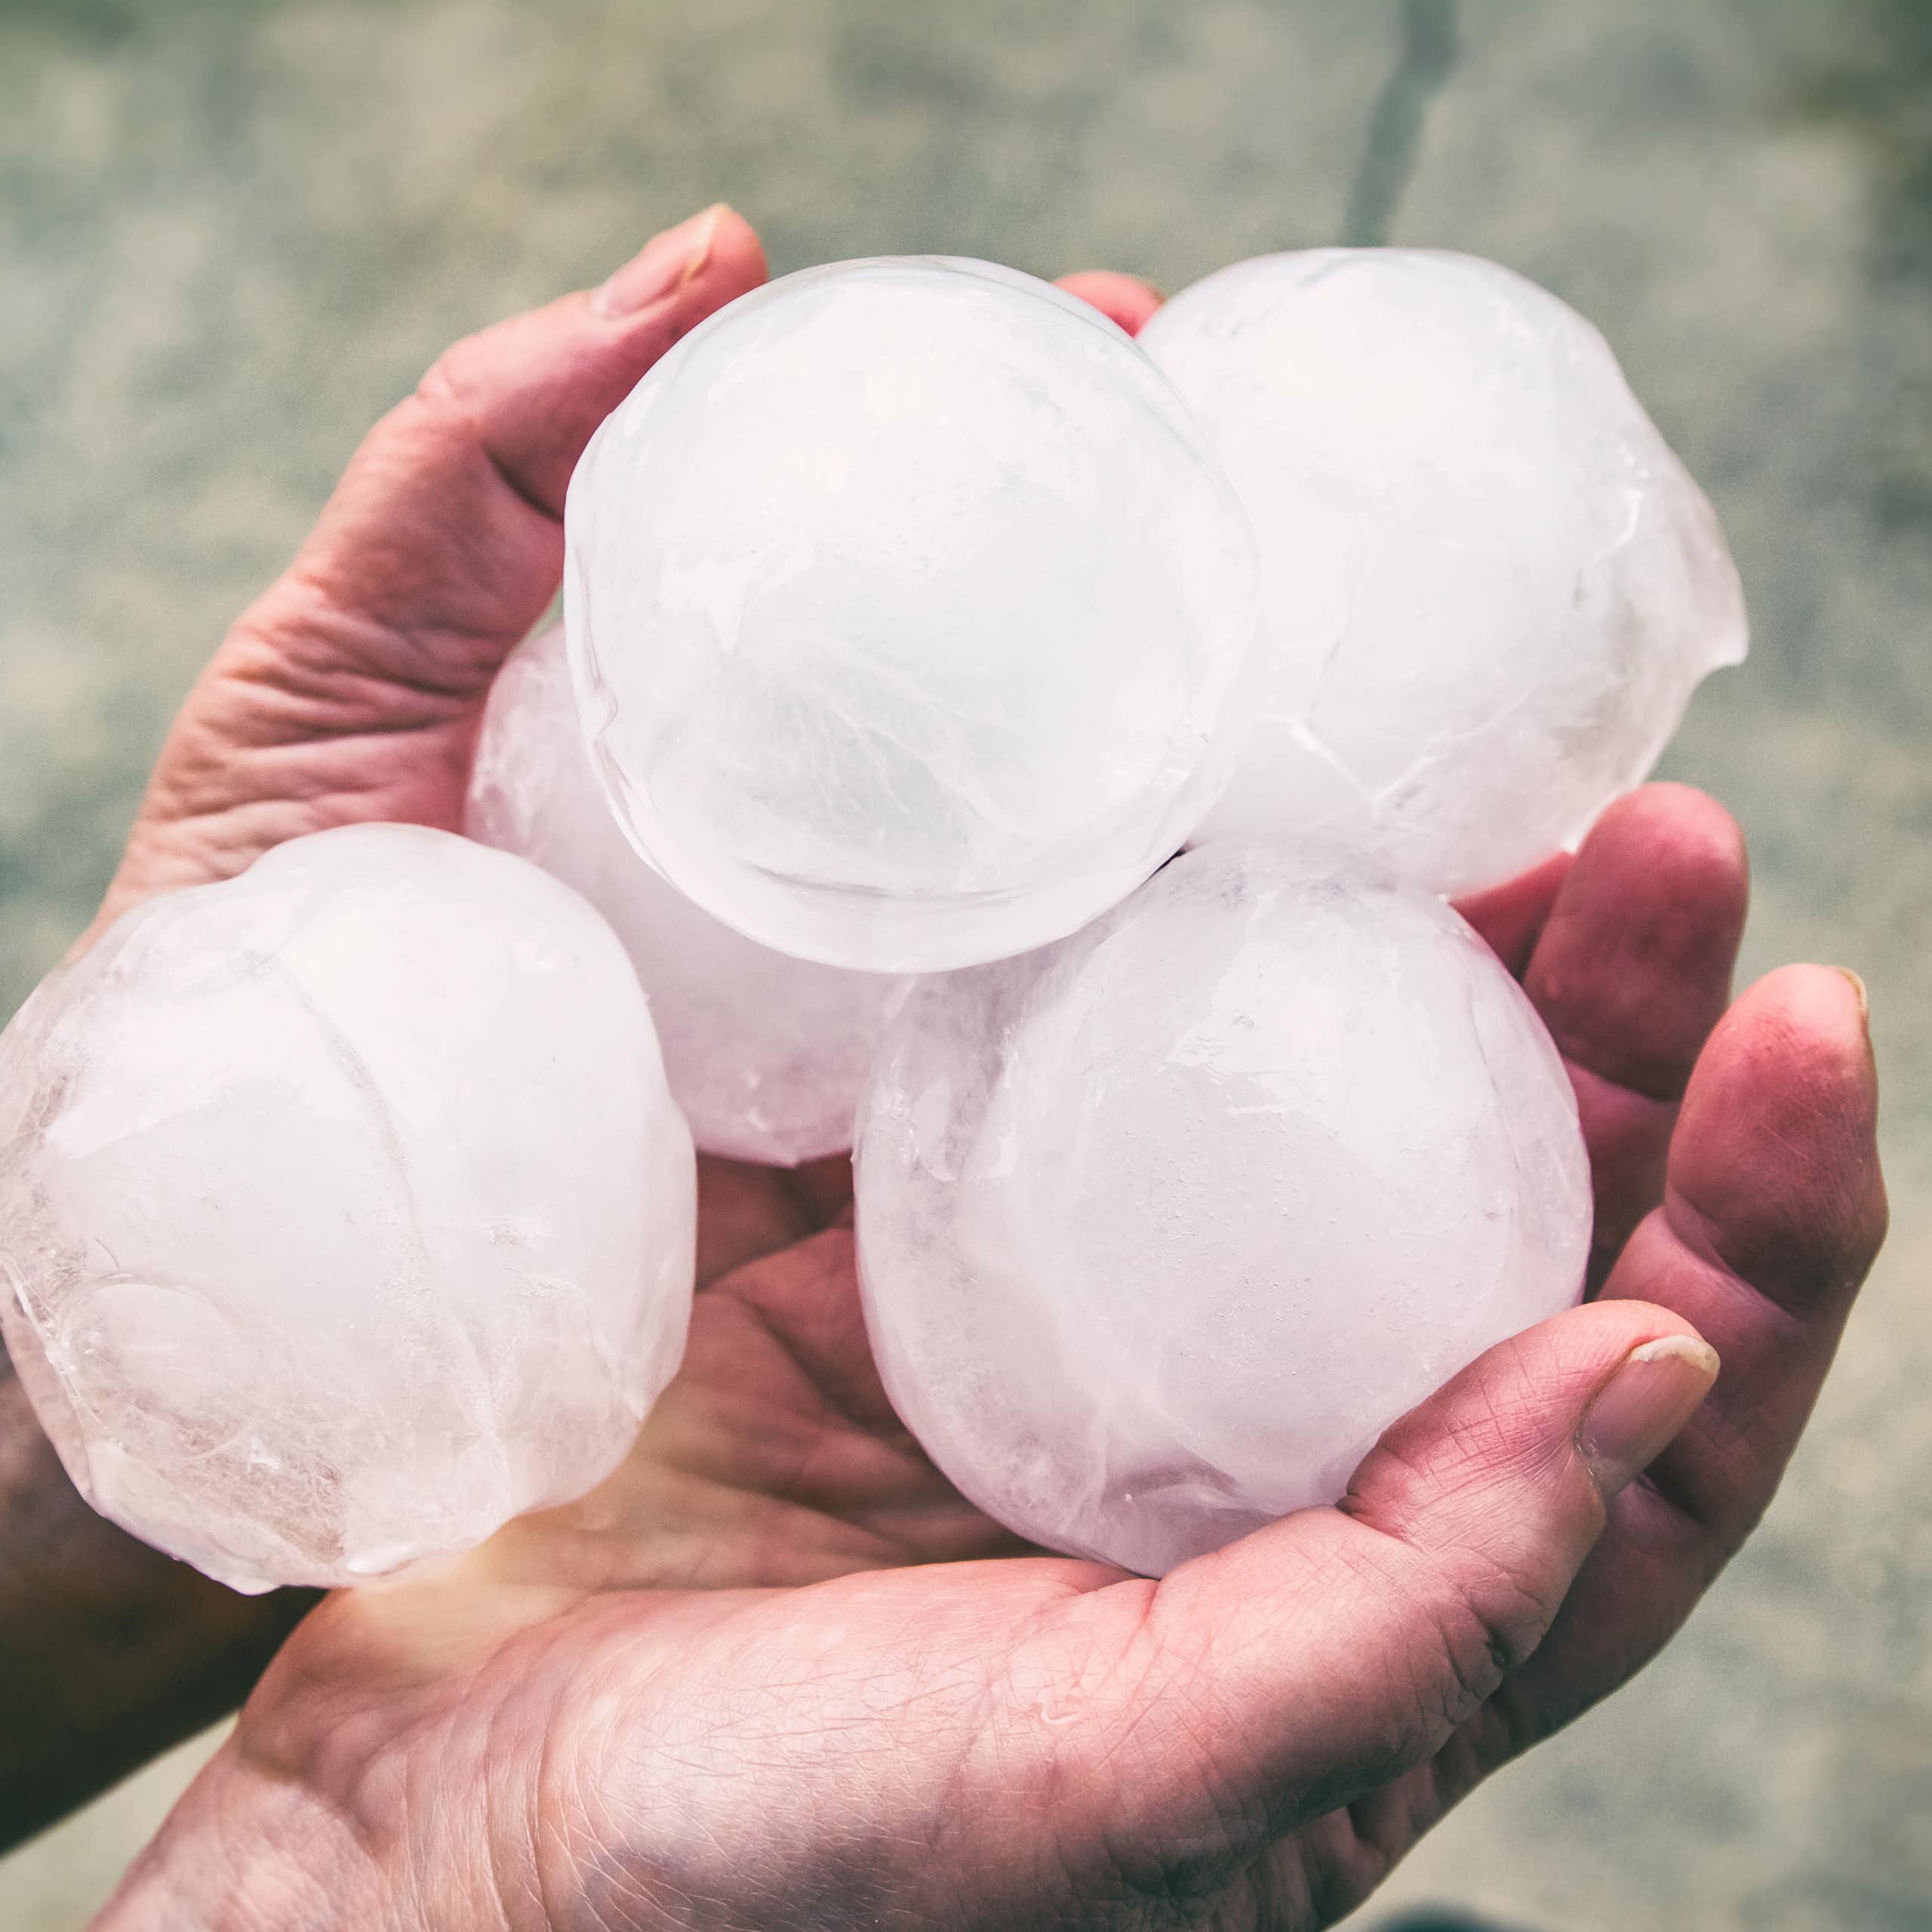 A person holds five baseball-sized hailstones in two hands.